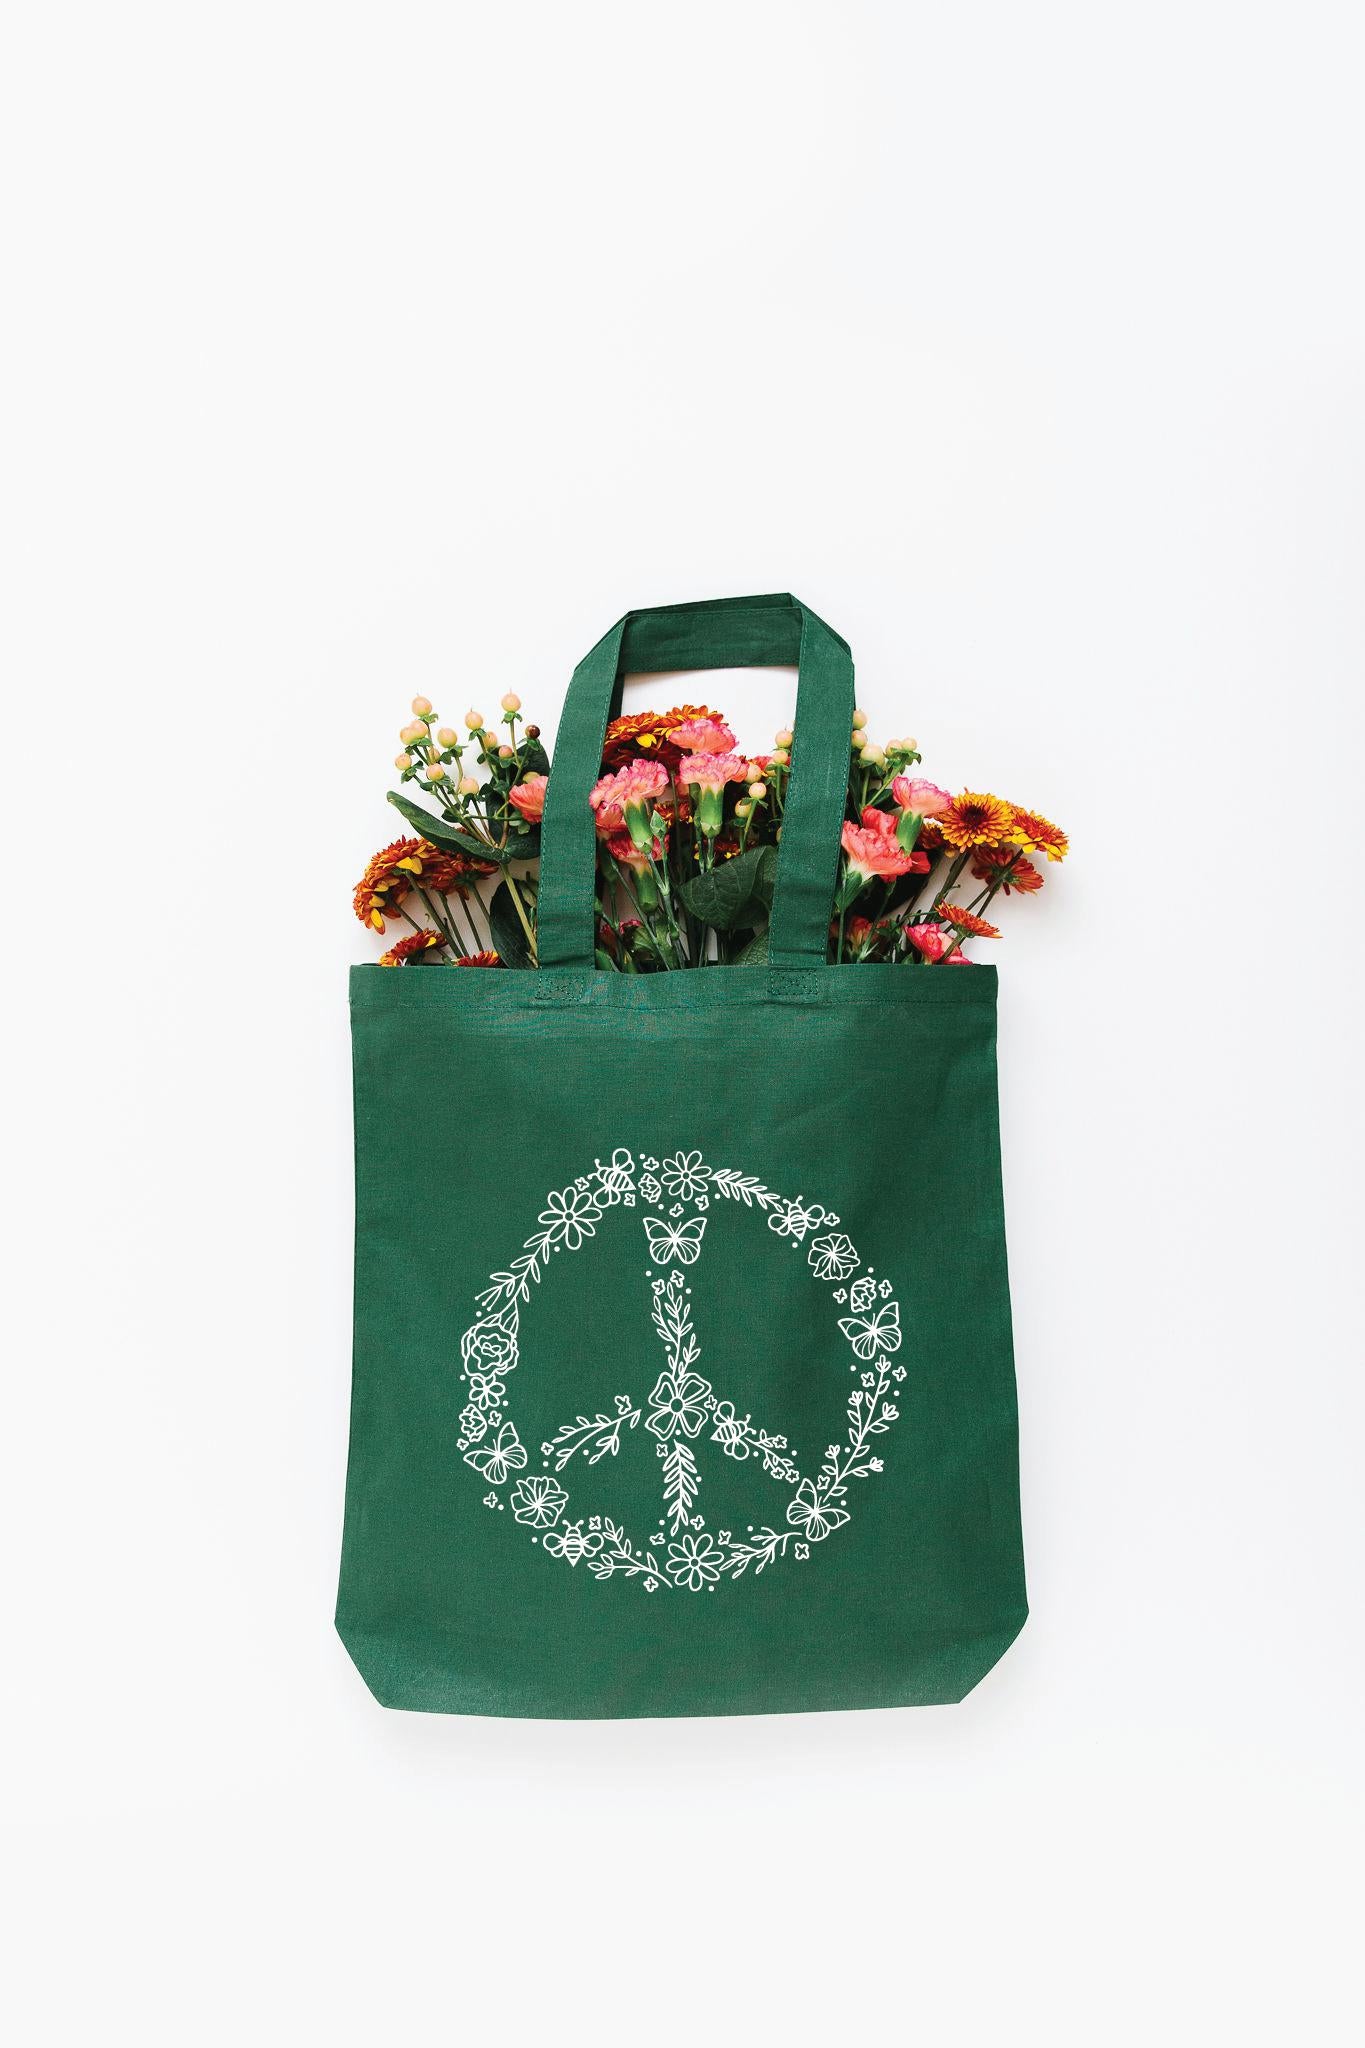 Floral Peace - White Tote Bag - Frankly Wearing